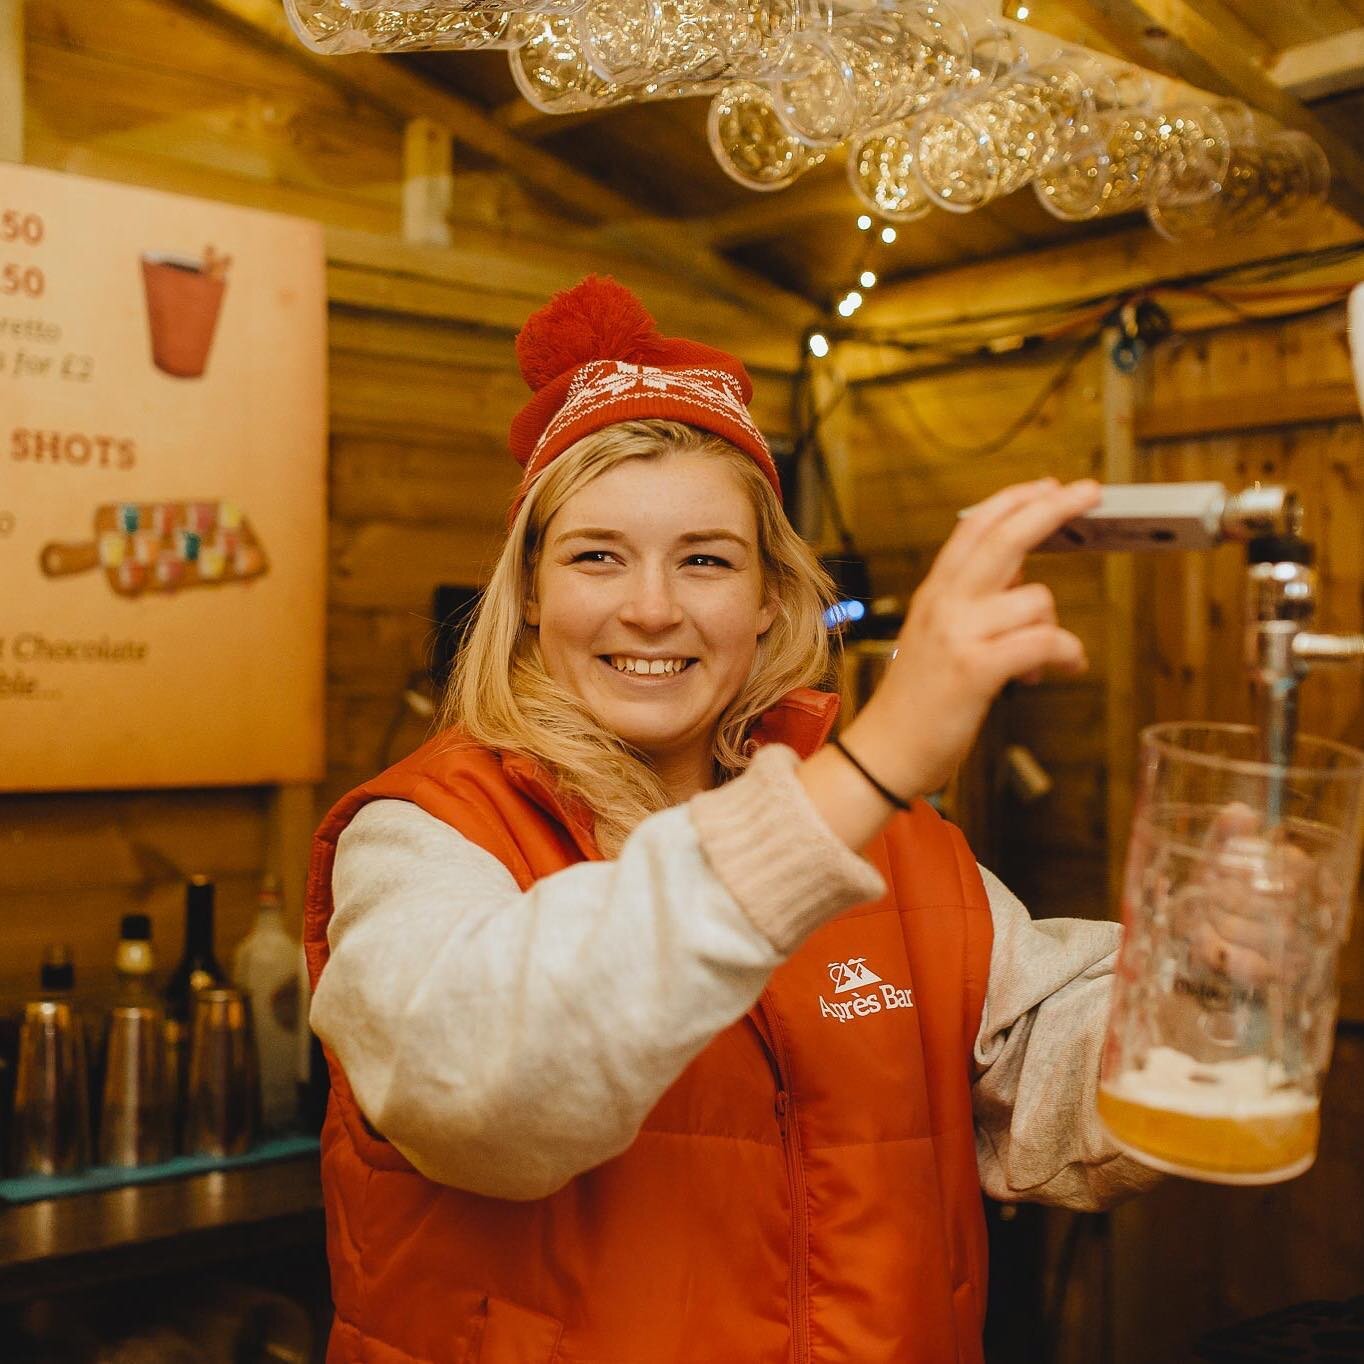 ❗️Calling all hospitality managers and supervisors around Reading and Northampton!❗️

As we get ready to open the doors of our winter pop-up bars in collaboration with @wepopuk , we are on the lookout for managers and supervisors to take the lead wit